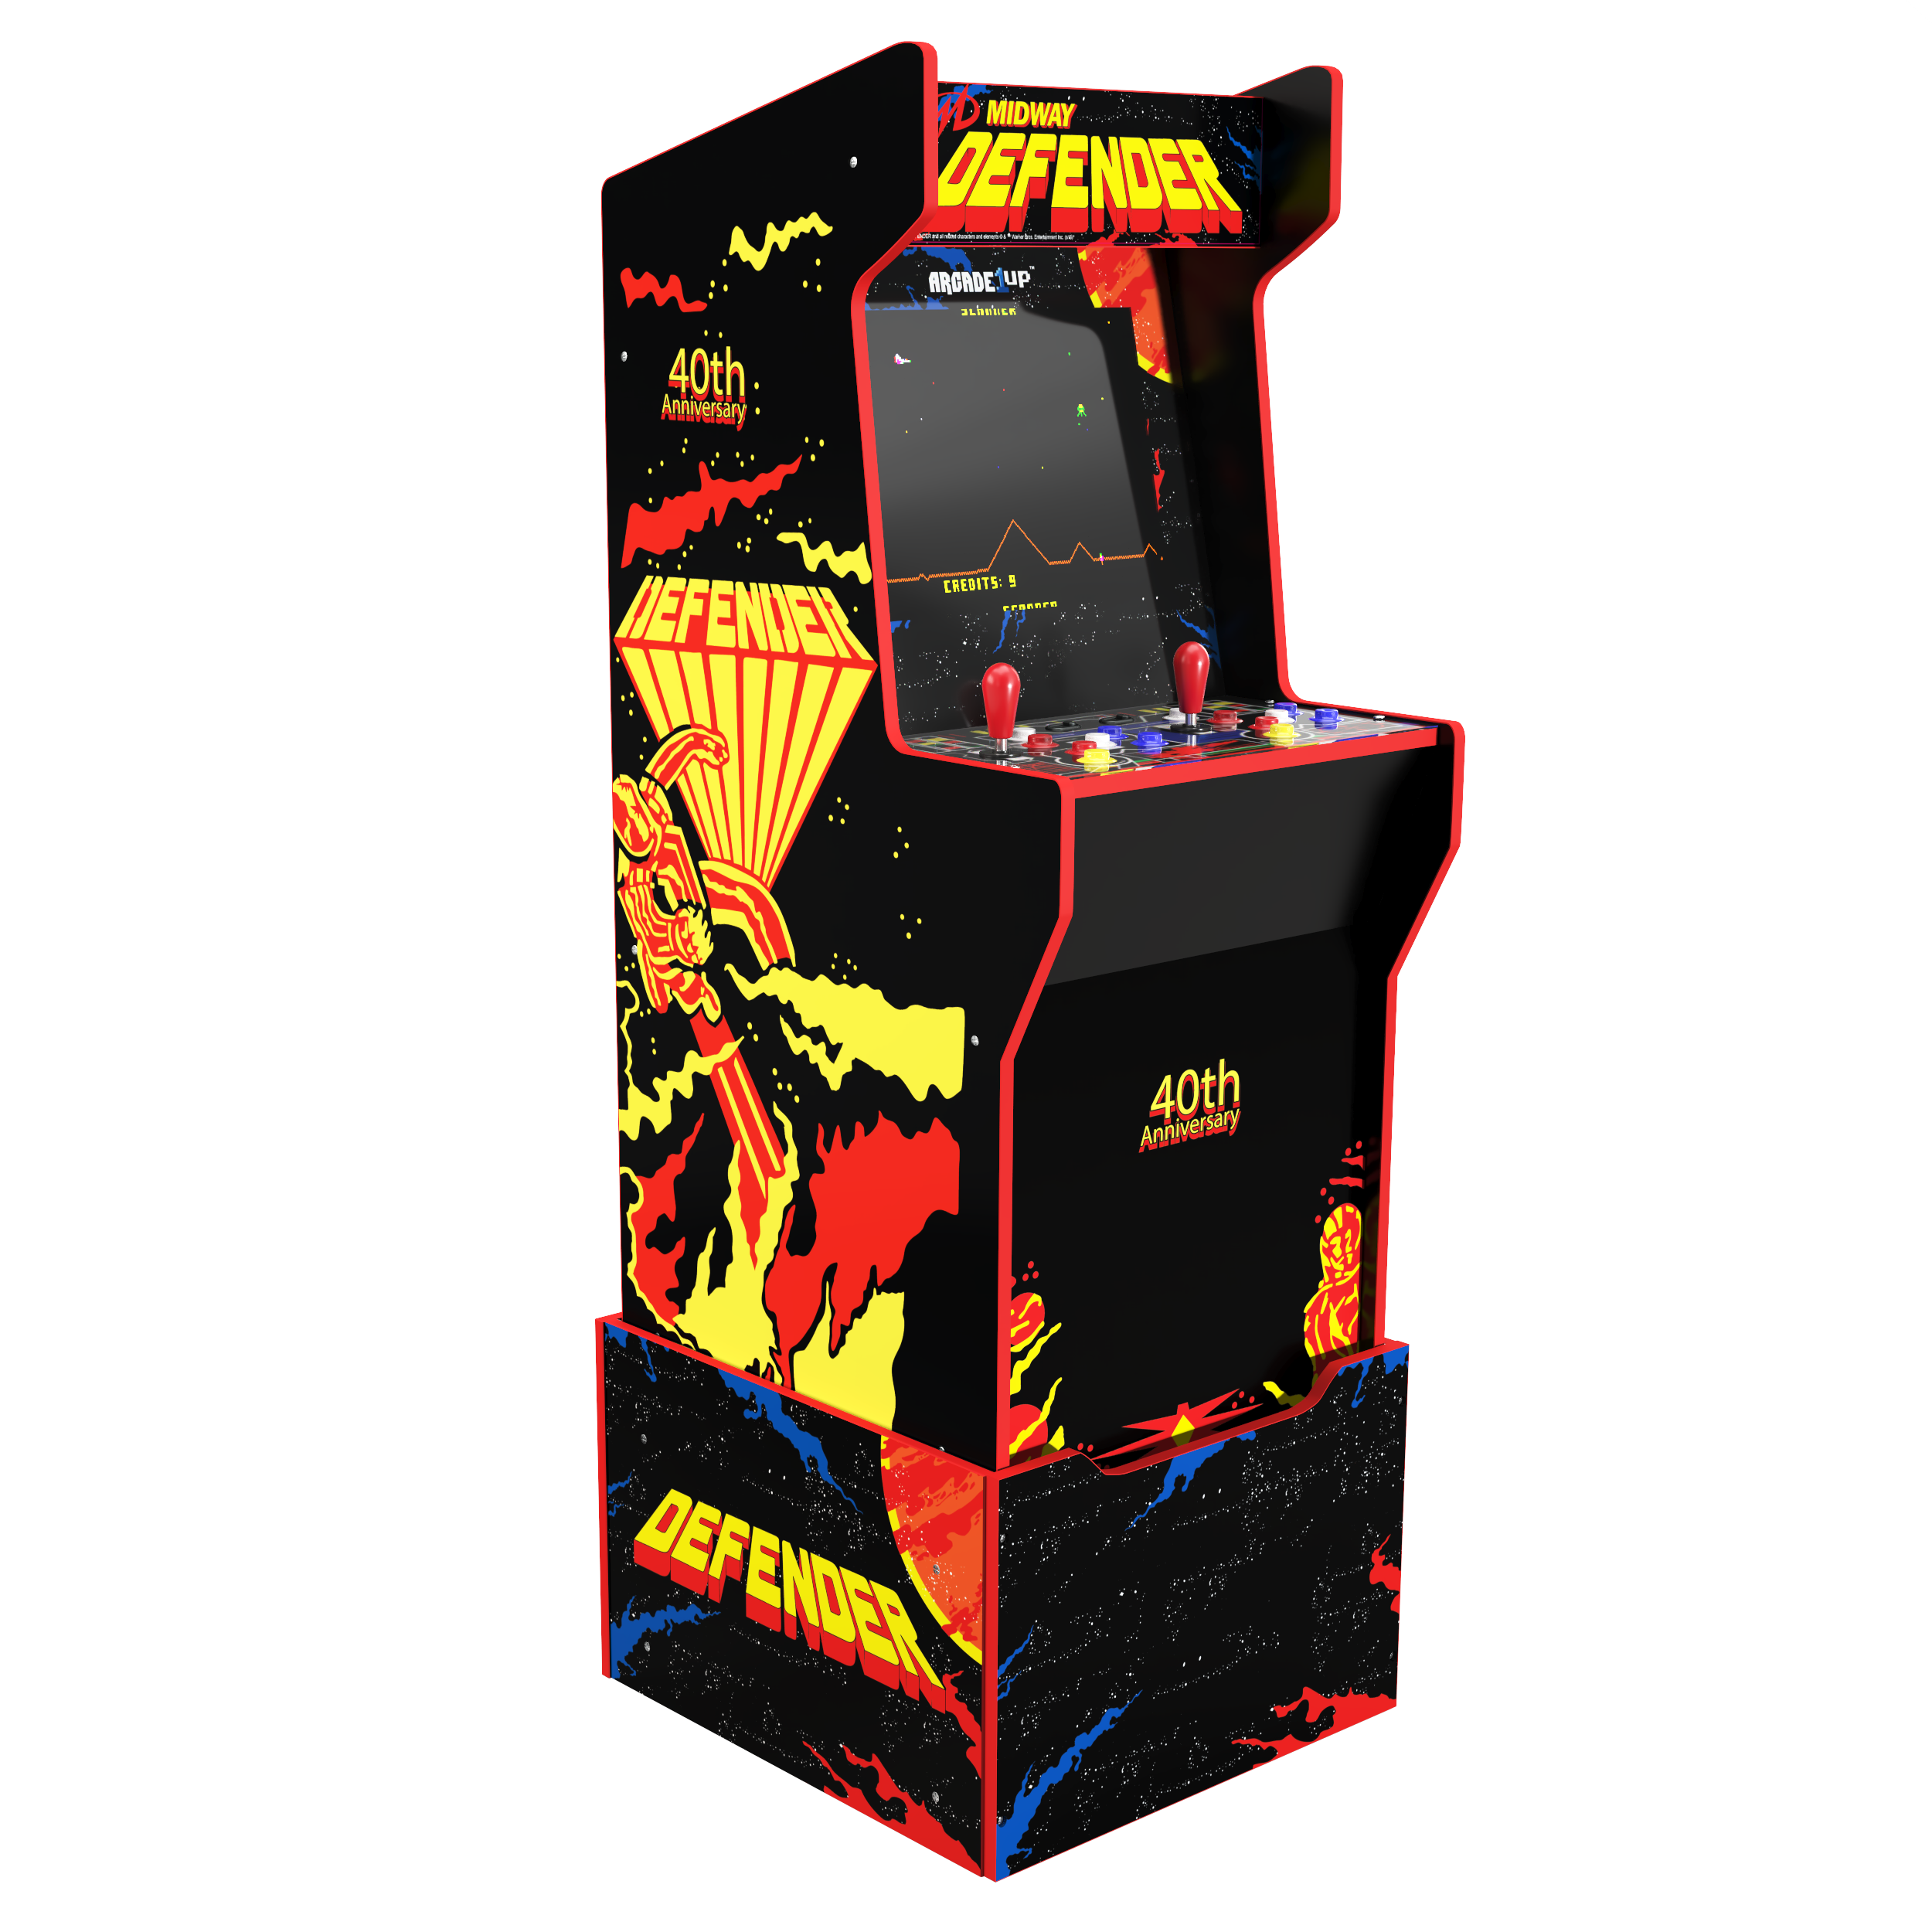 Defender 40th Anniversary 12-IN-1 Midway Legacy Edition Arcade with Licensed Riser and Light-Up Marquee, Arcade1Up - image 2 of 6